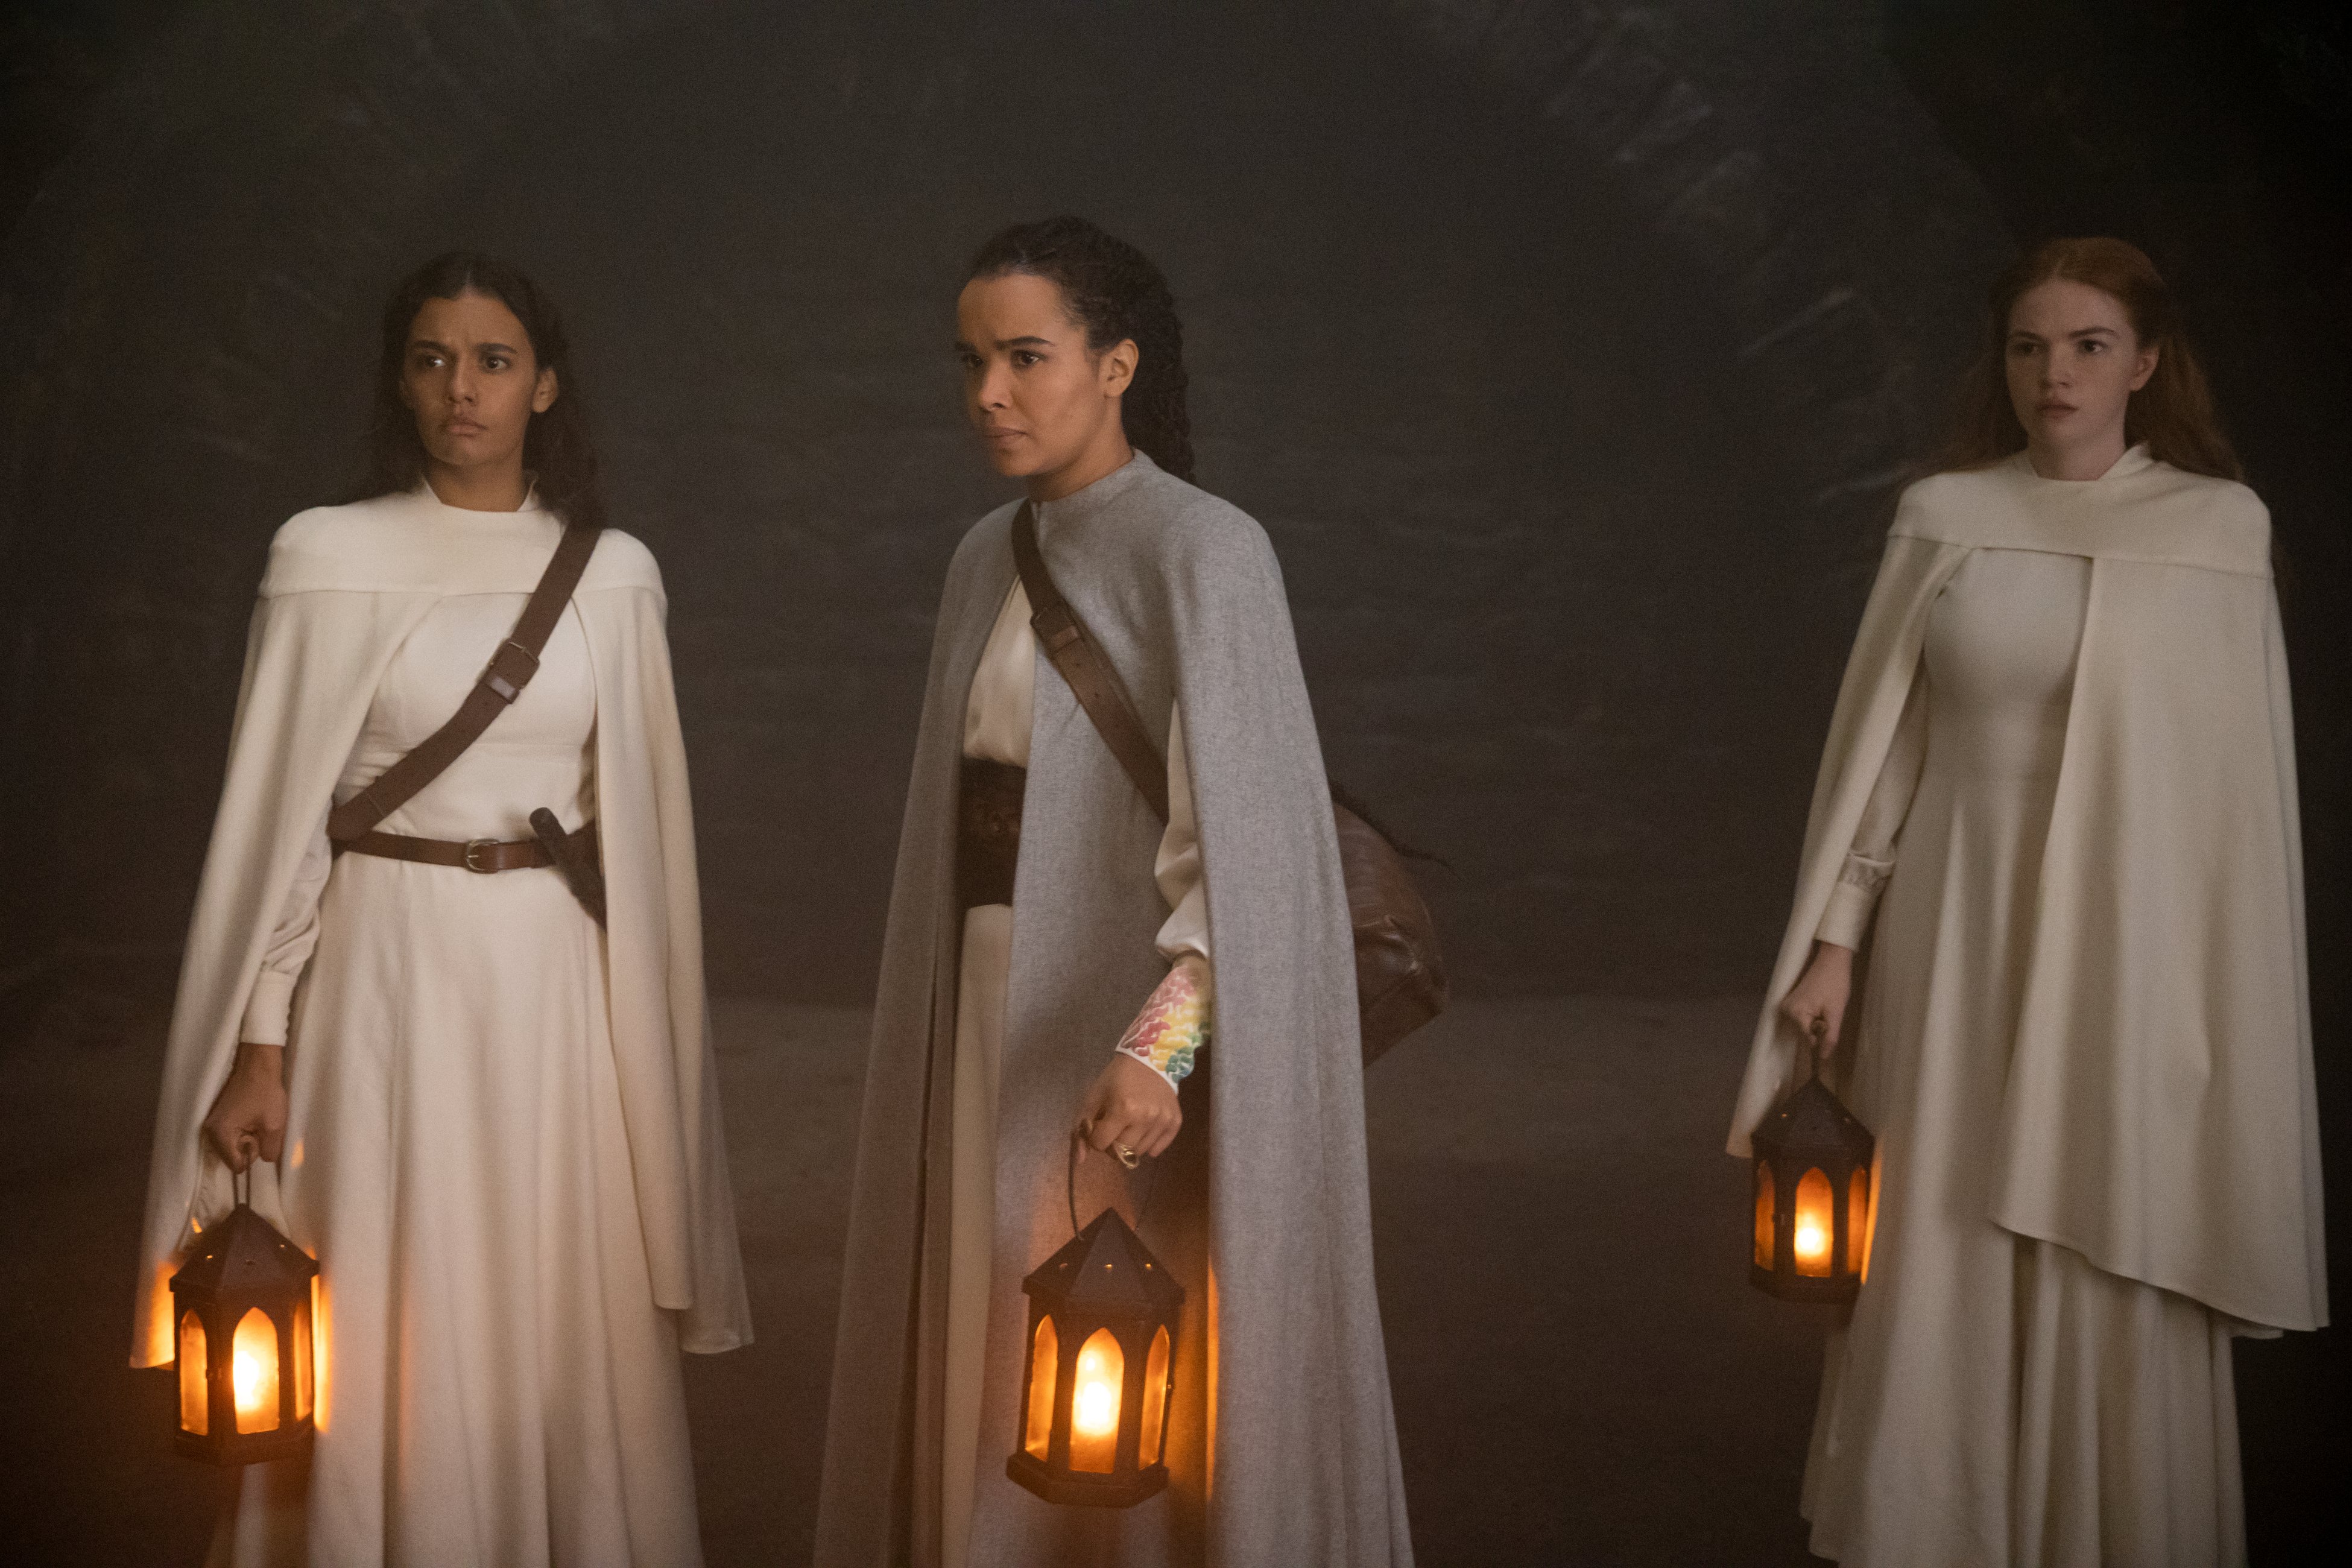 Full shot of Egwene, Nynaeve, and Elayne standing in a dark cave, wearing their outfits from The White Tower. Each carries a glowing lantern. Egwene and Nynaeve wear leather over-shoulder weapon holsters.